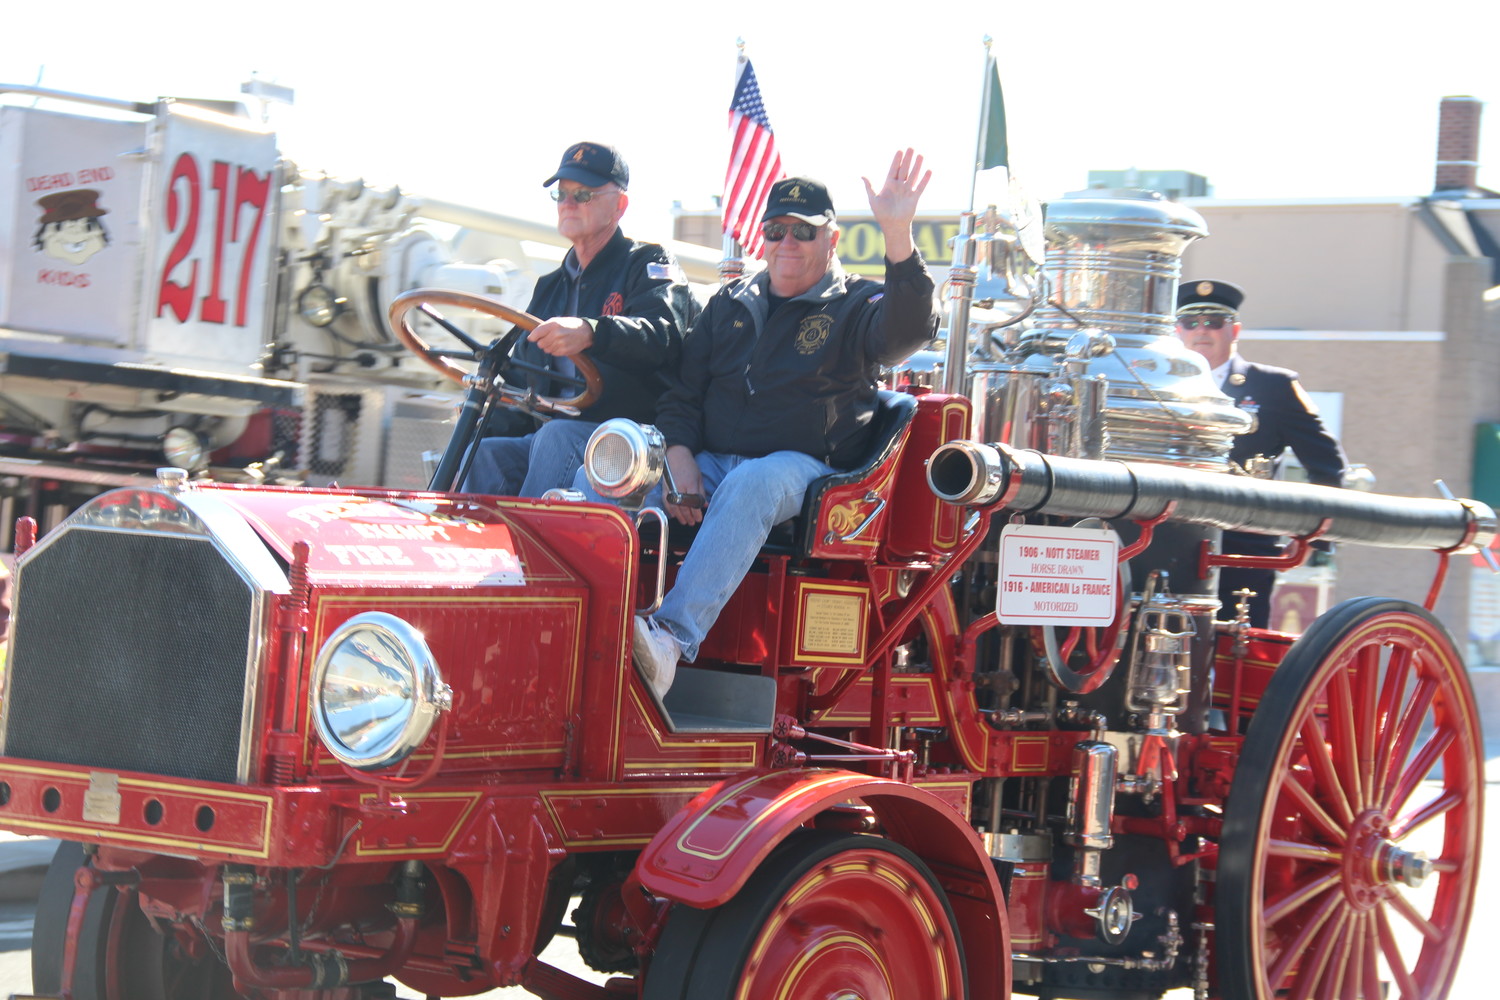 Freeport firefighters rode in an antique fire truck after Kennedy’s announcement.